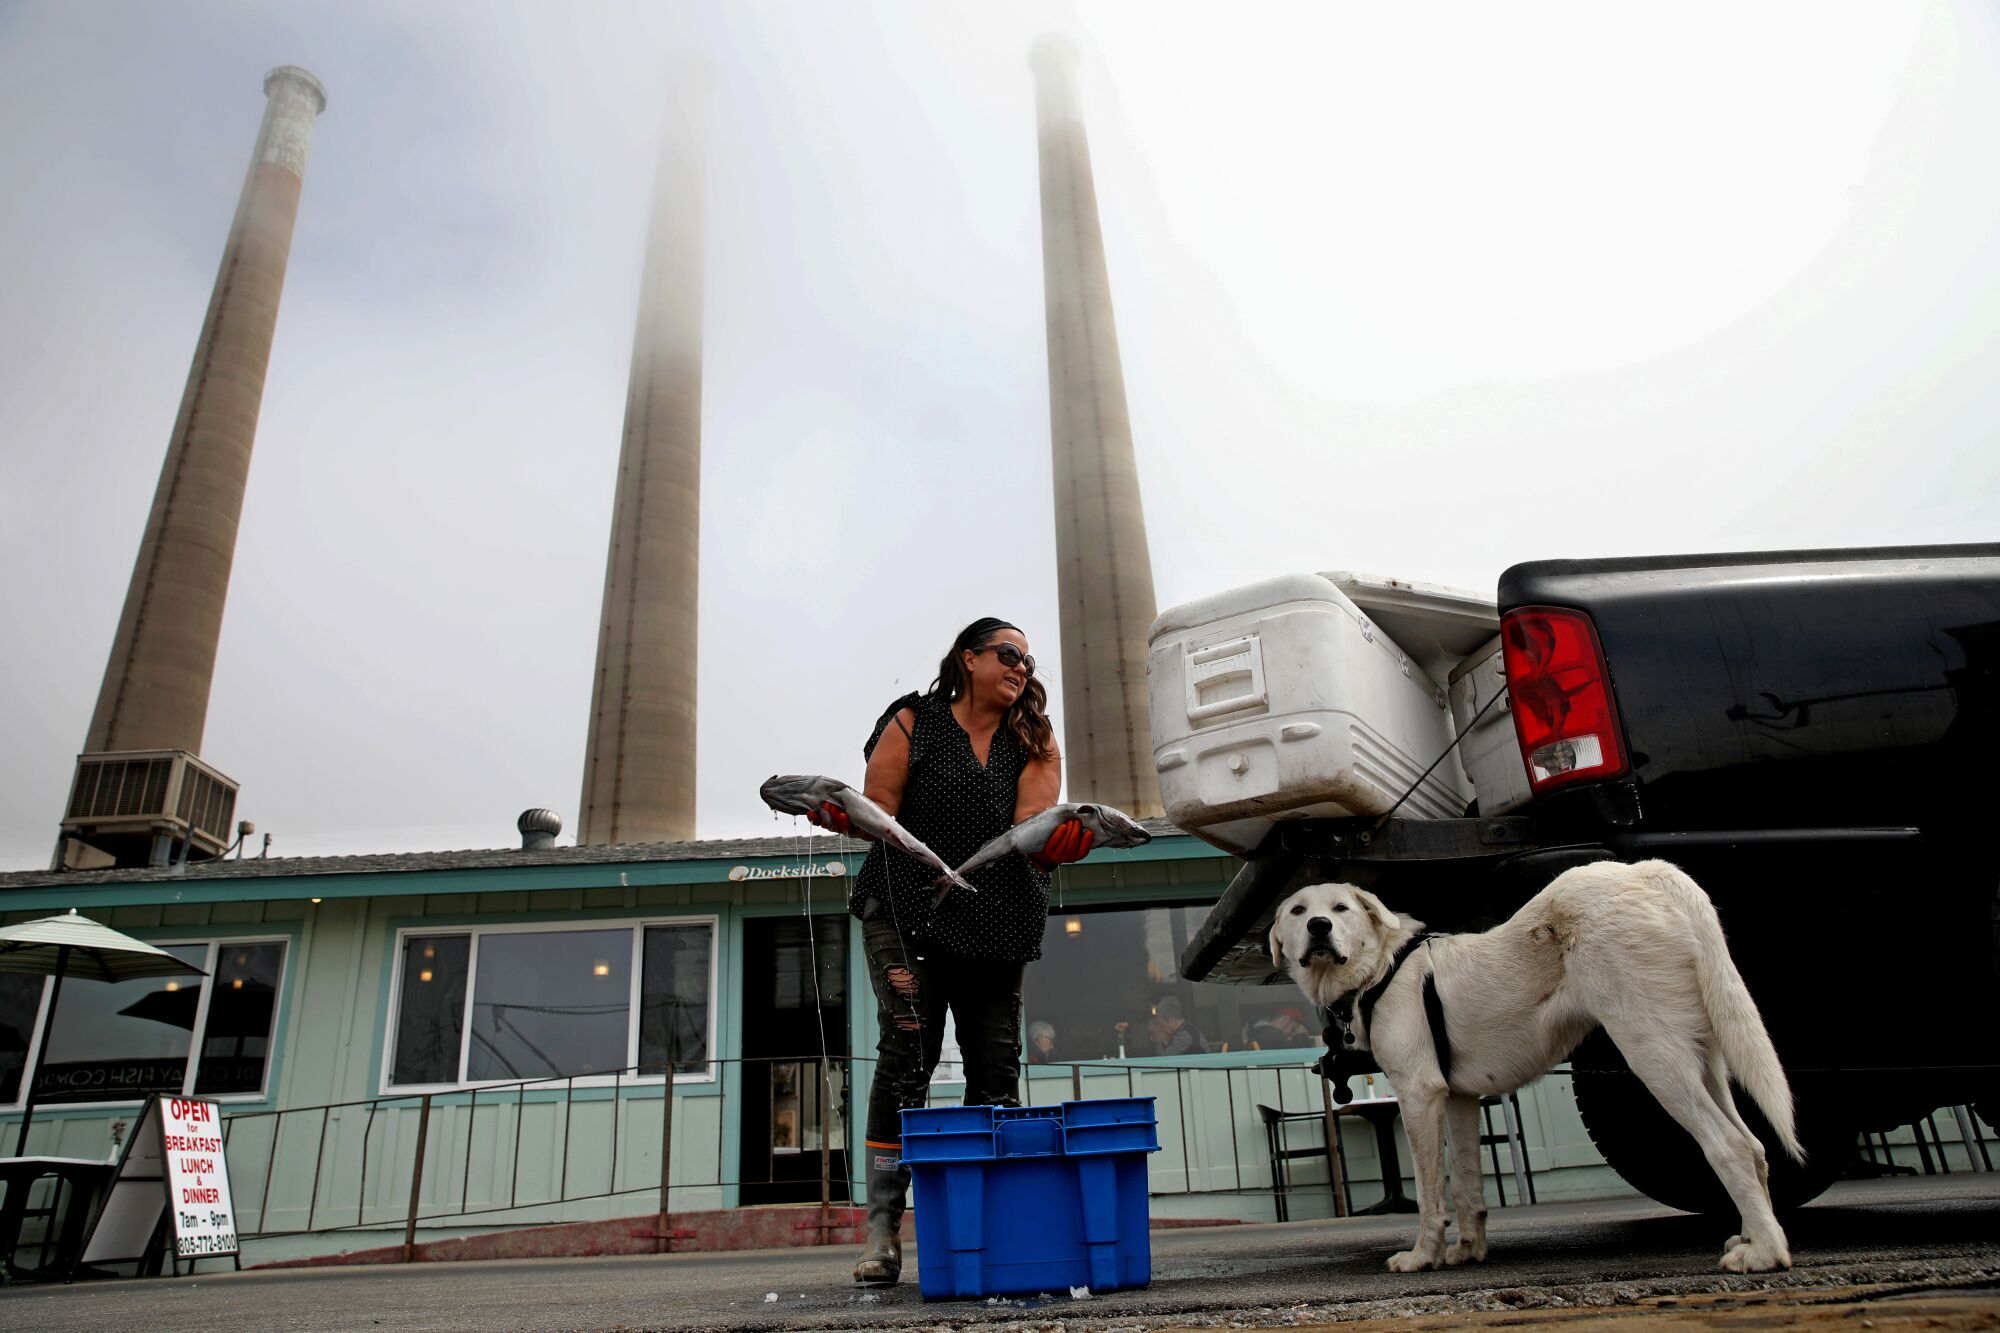 A woman with a dog loads fish into coolers in the back of a pickup truck as smokestacks tower behind her.